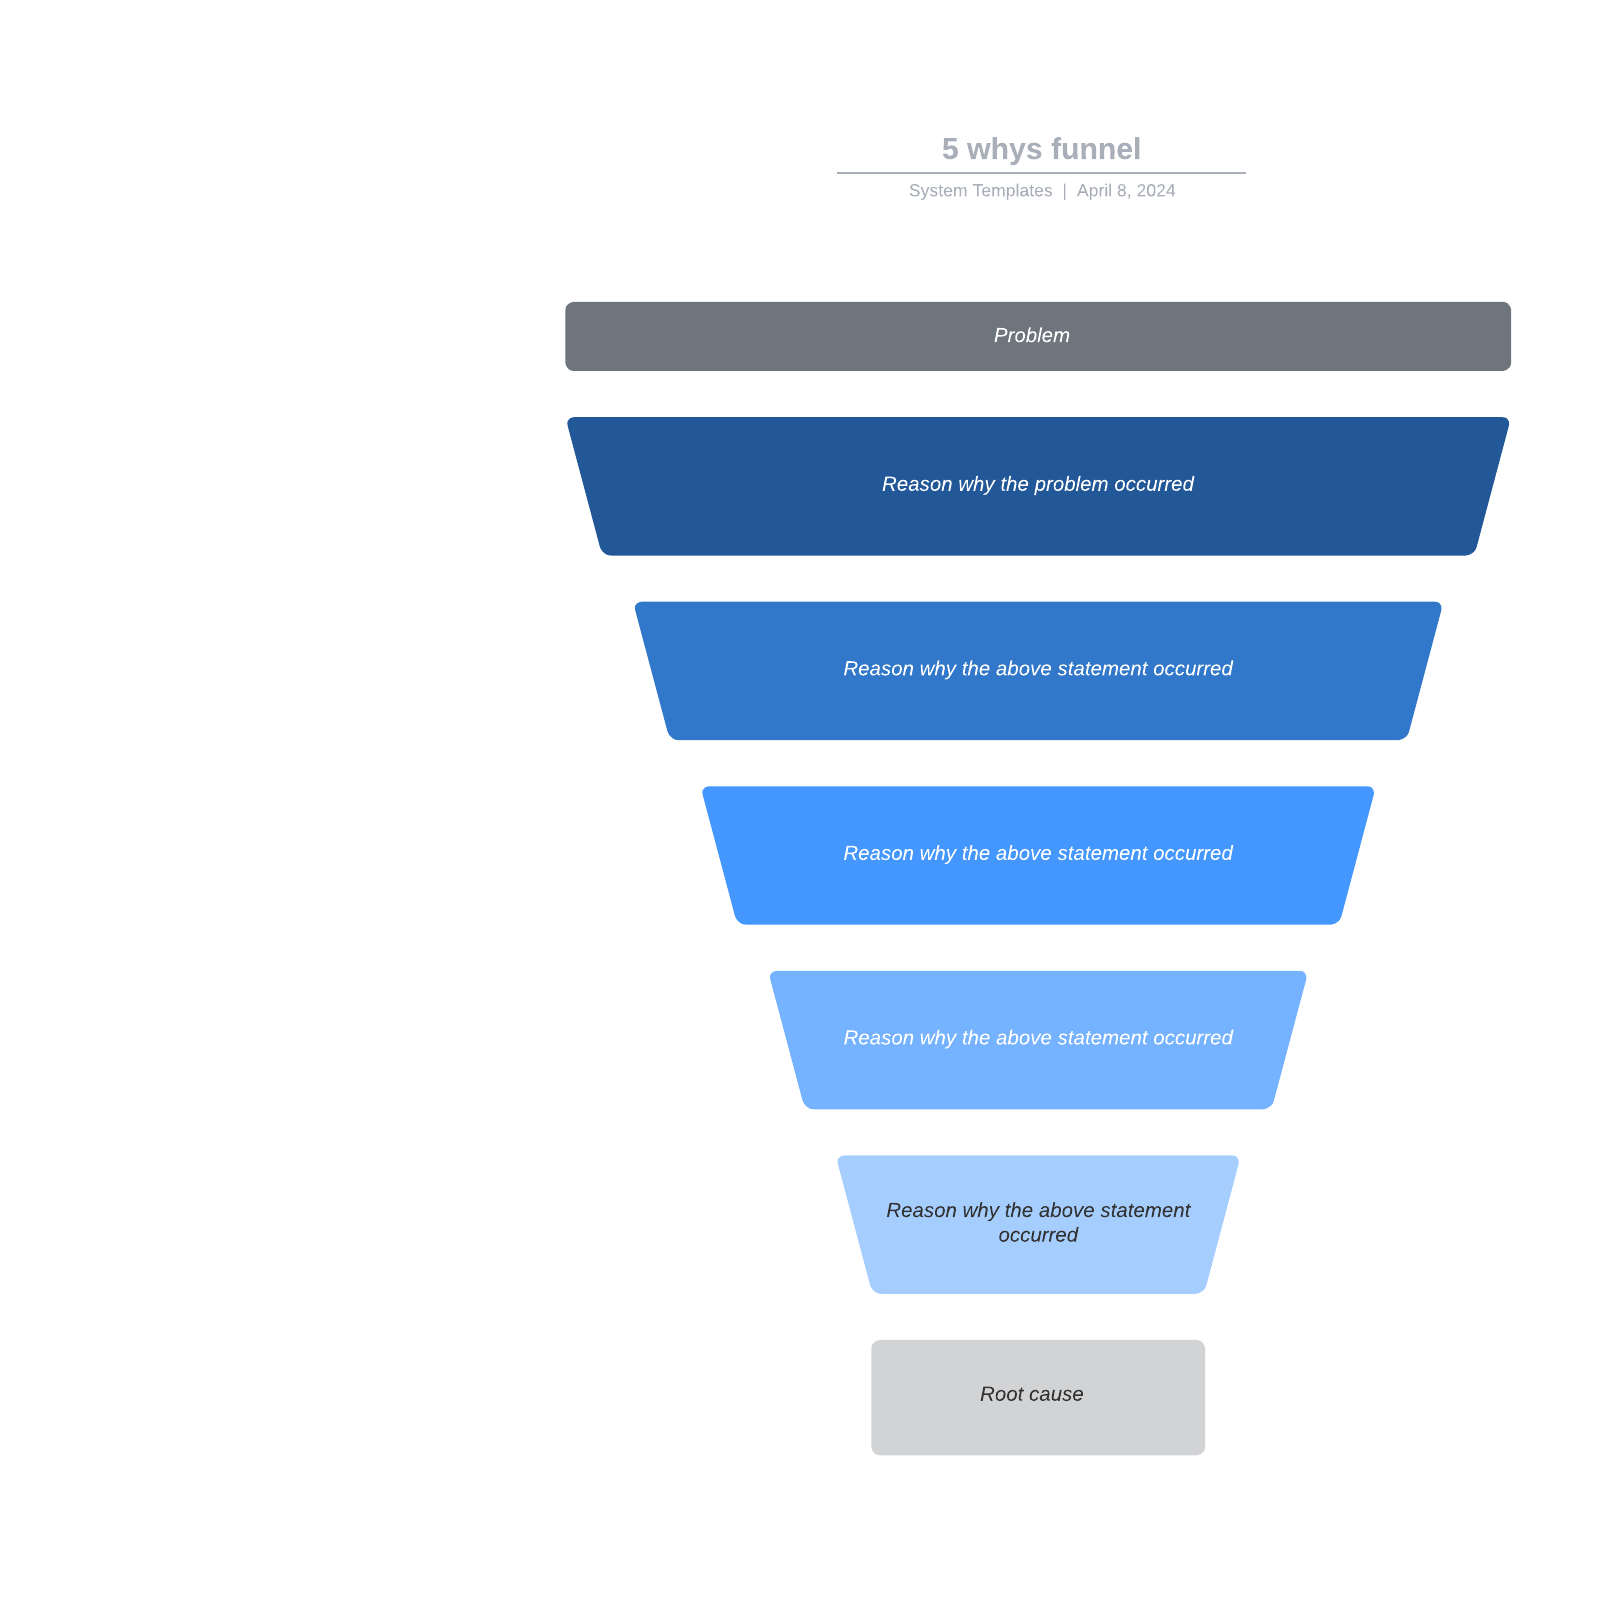 5 whys funnel example